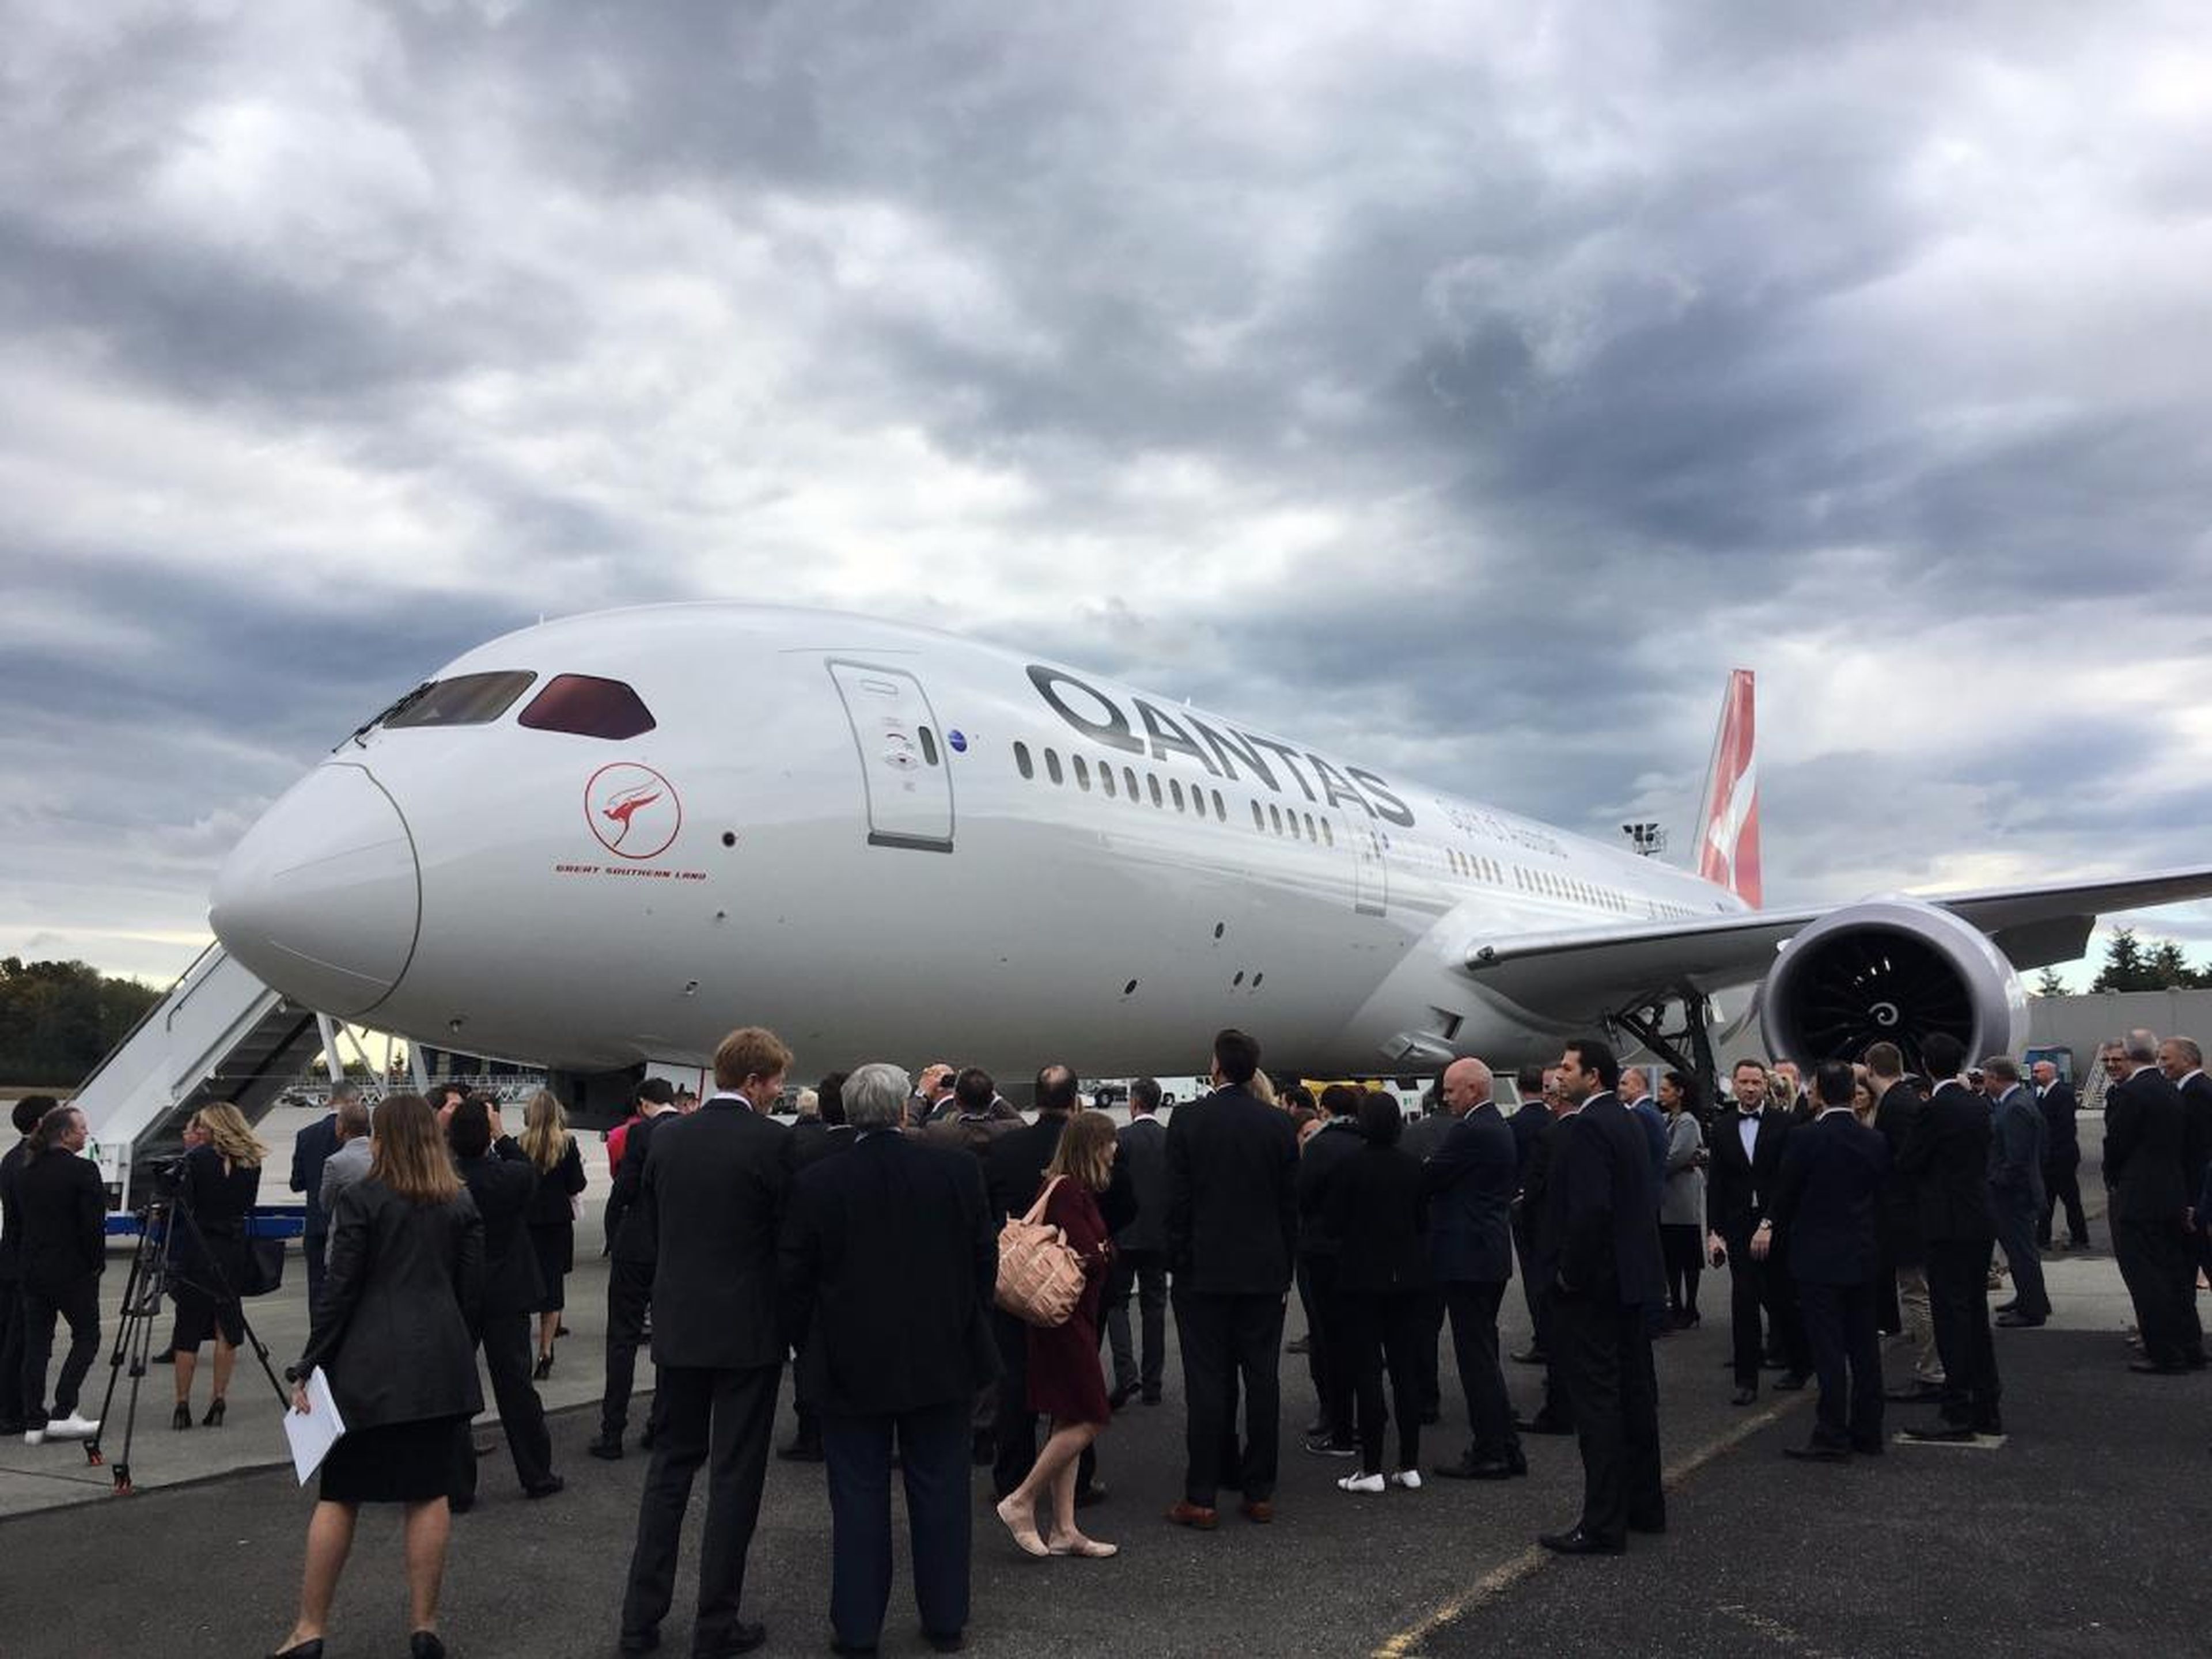 Smaller next-generation composite wide-bodies like the Boeing 787 Dreamliner offer airlines more flexibility and less risk. According to the CEO of Qantas, Alan Joyce, it costs less to operate two Dreamliners than it does to fly a